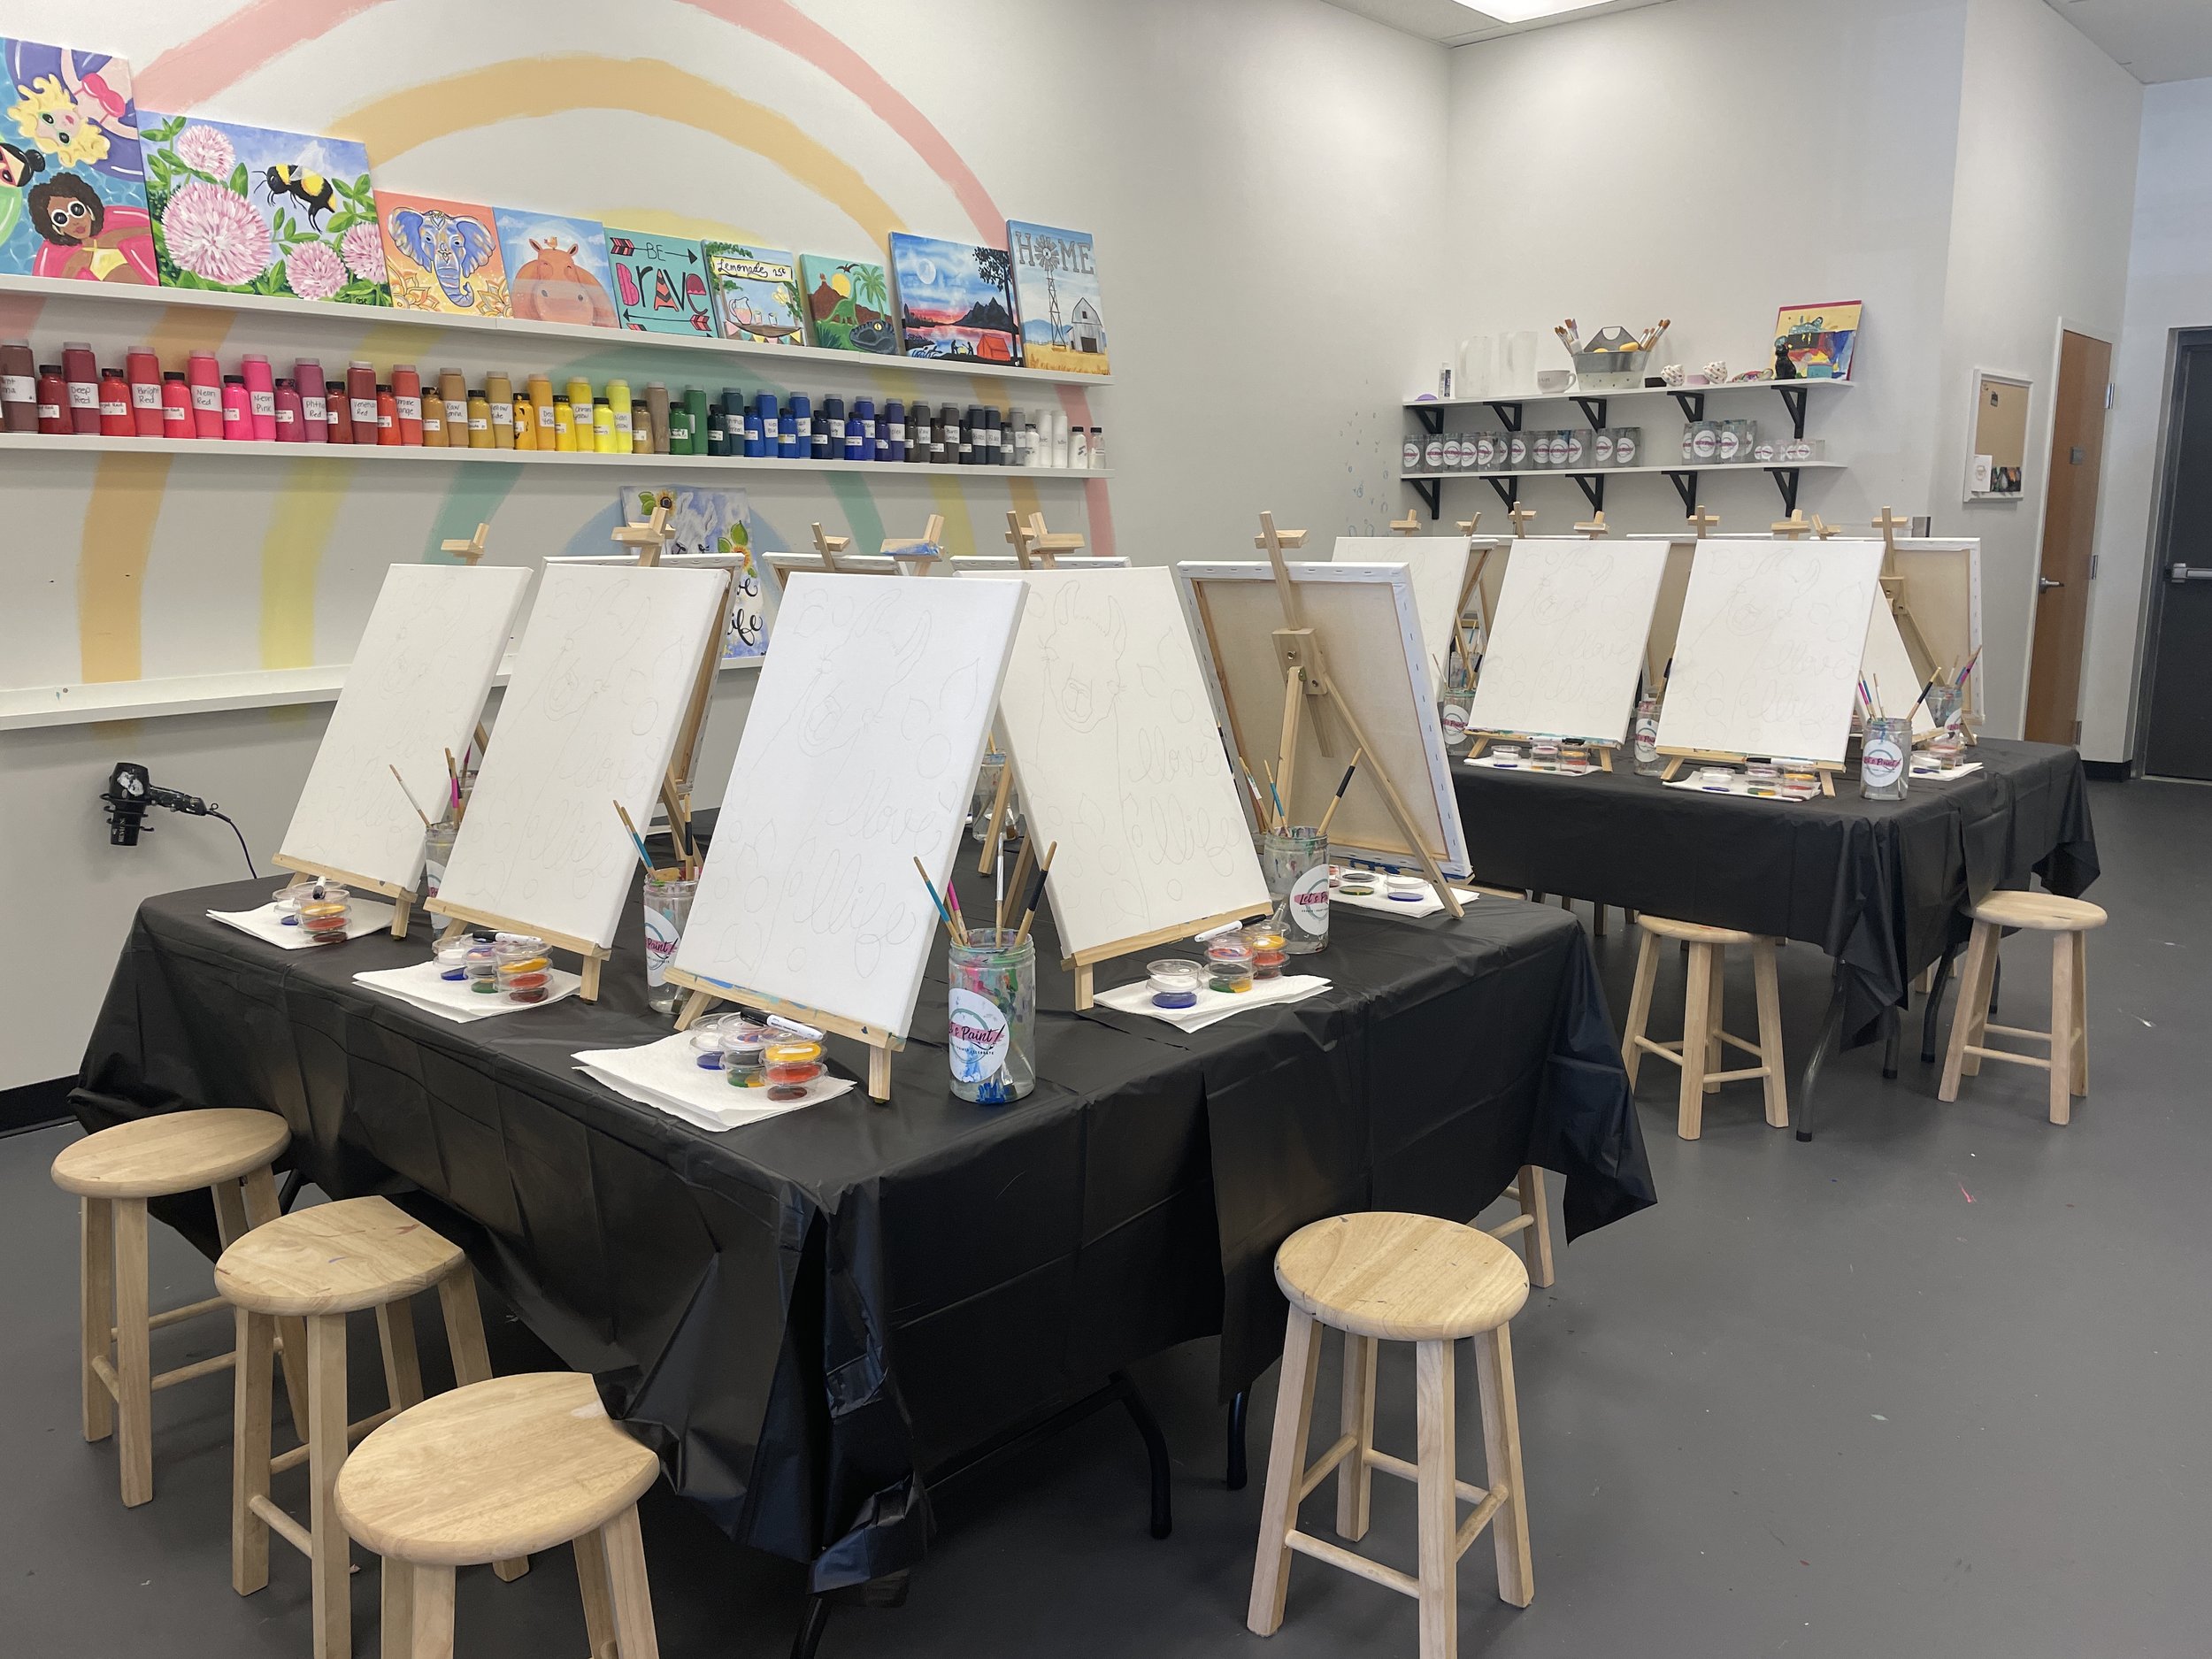 Private Events — Let's Paint!